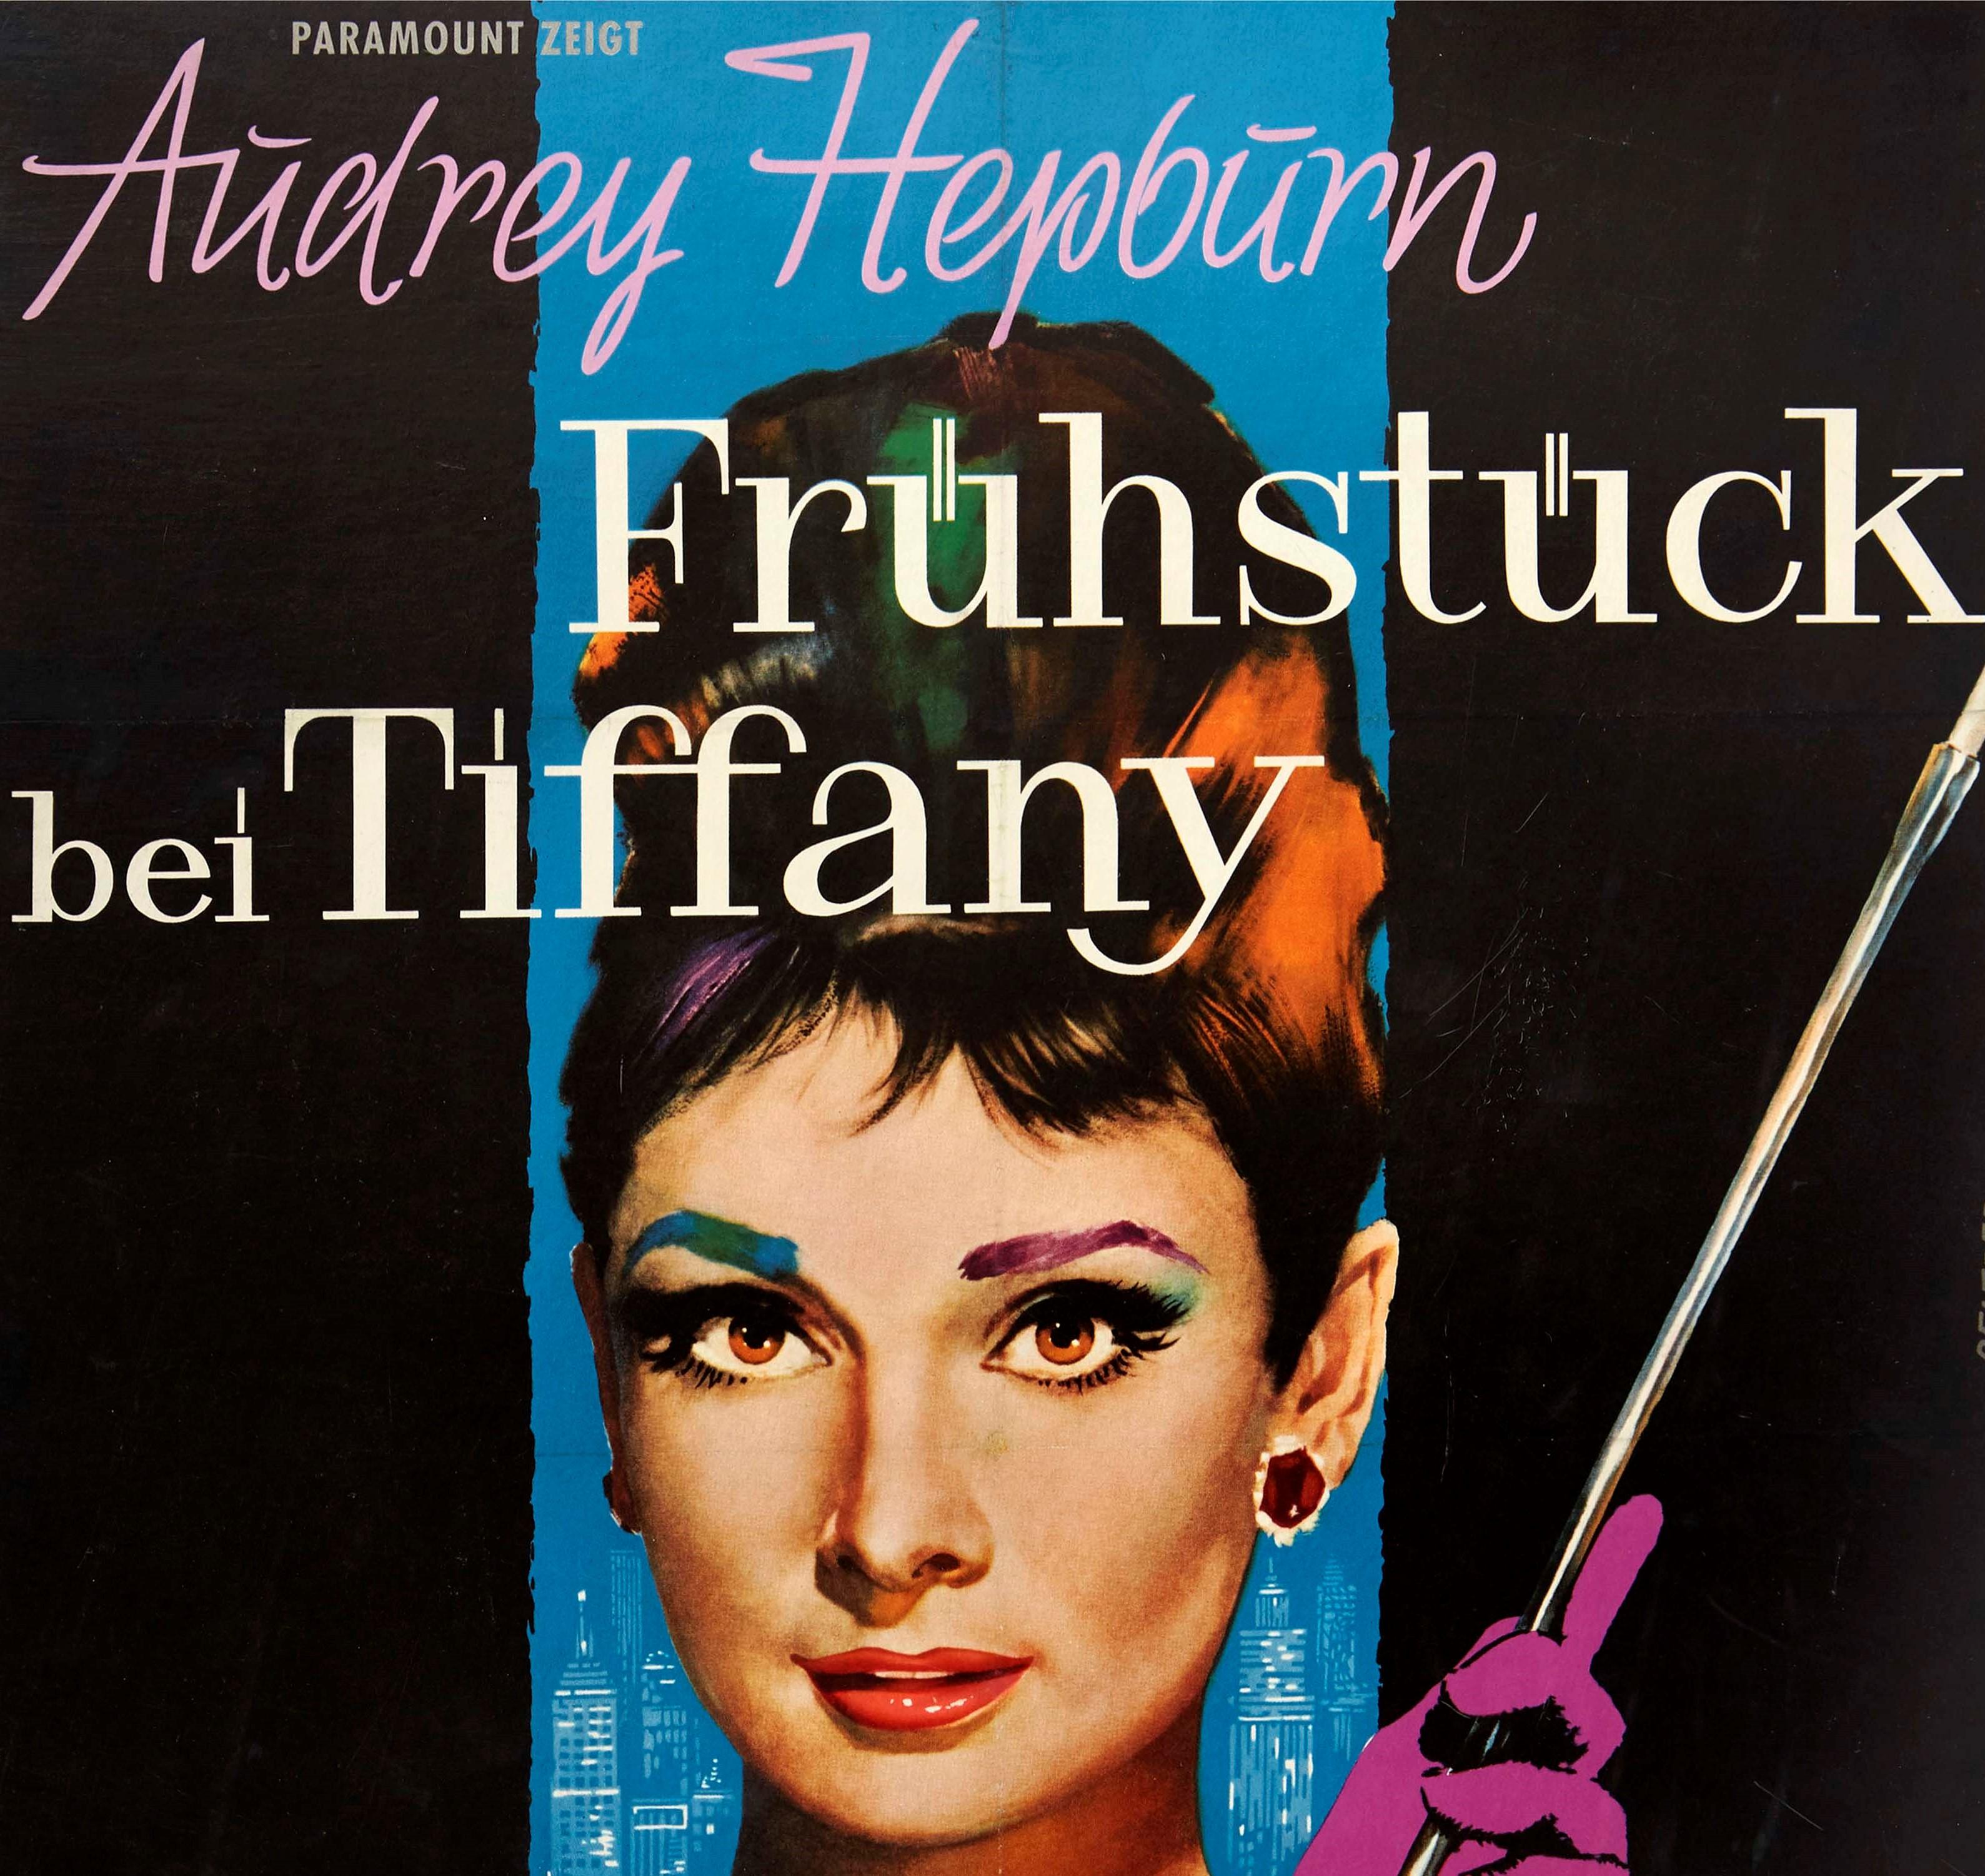 Original vintage movie poster for the German release of the classic film Breakfast at Tiffany's / Fruhstuck bei Tiffany directed by Blake Edwards and starring Audrey Hepburn, George Peppard, Patricia Neal, Buddy Ebsen, Martin Balsam and Mickey